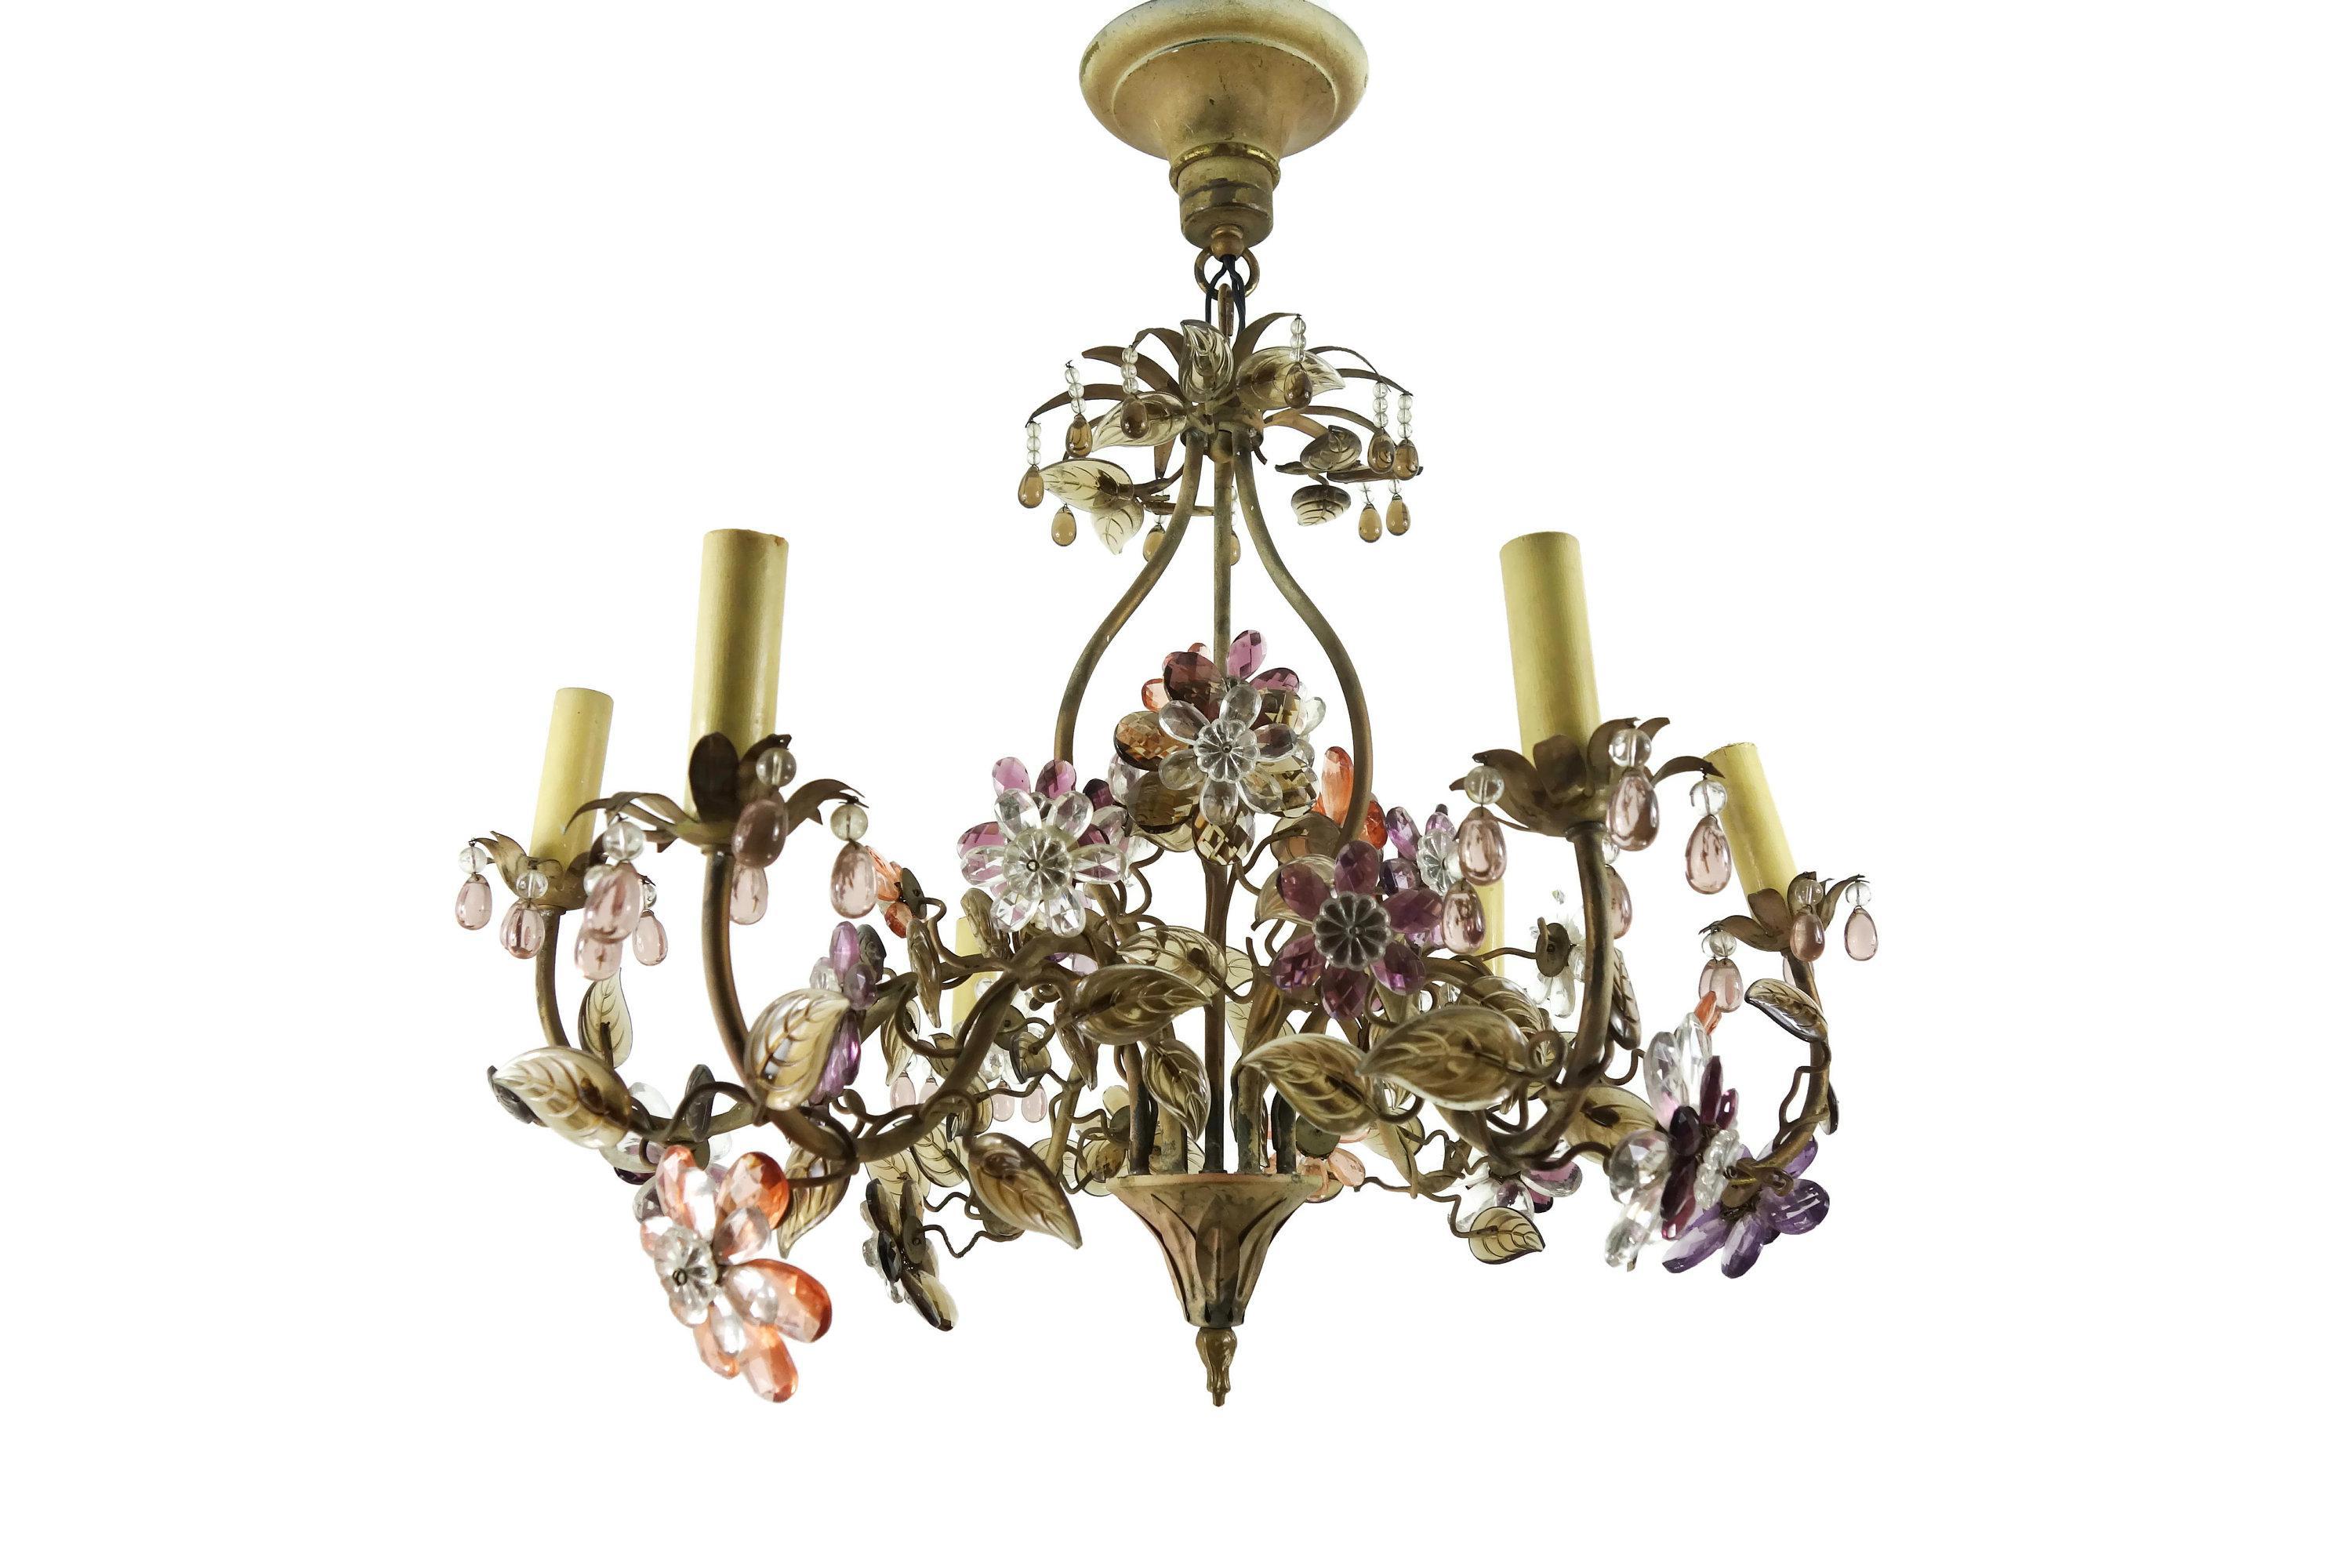 c1940s French Regency Colorful Crystal Flowers and Petals in Bronze Vase. This chandelier is attributed to Maison Bagues. It features quite an array of beautiful floral bouquet in bronze vase.